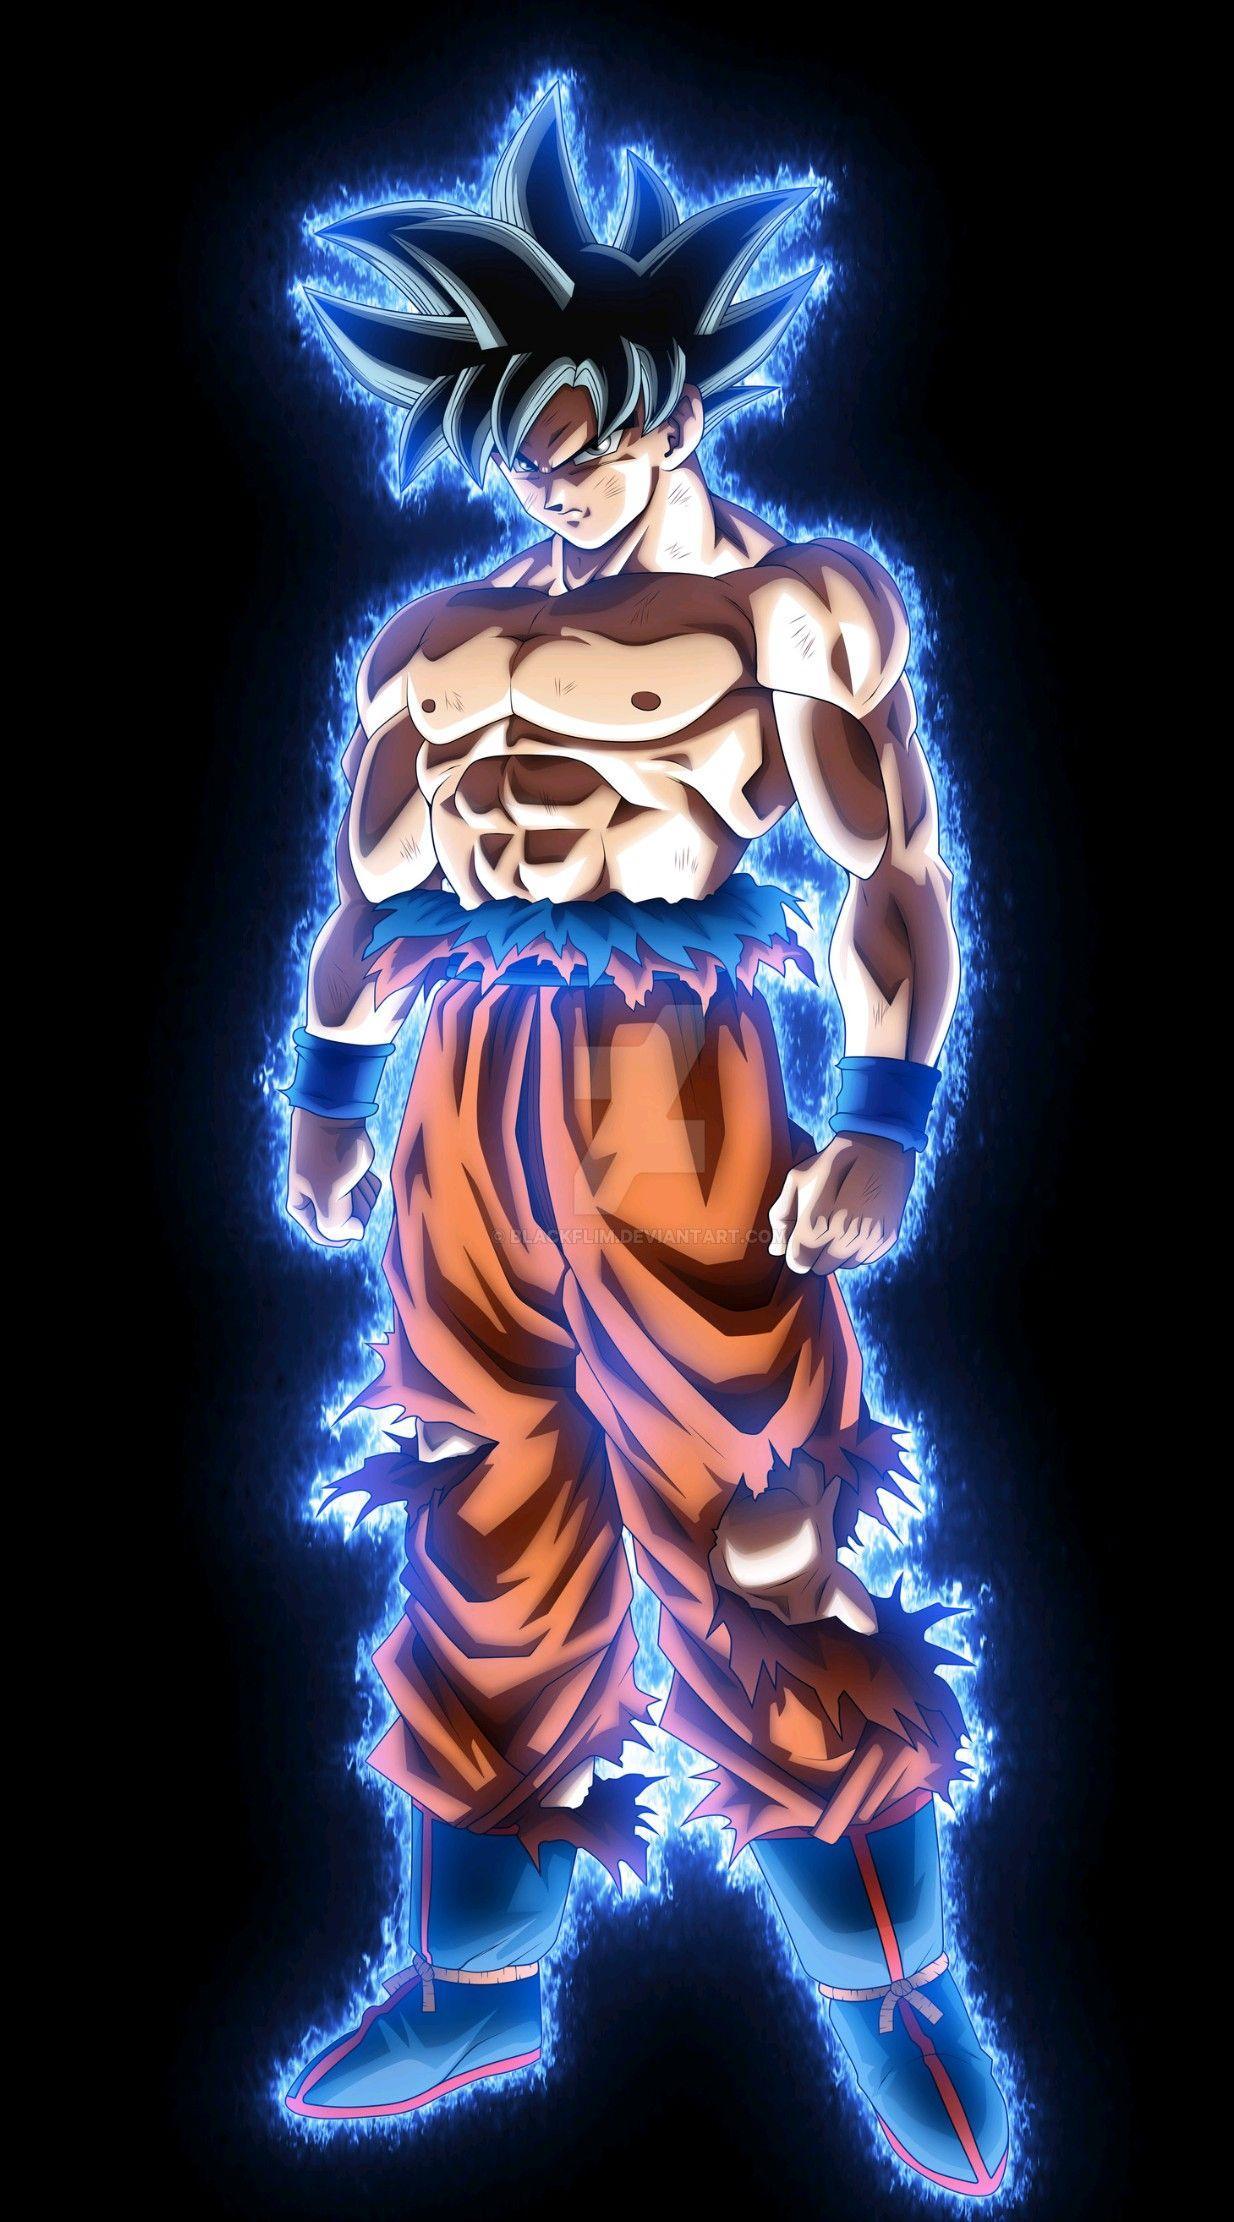 Goku Wallpaper for Android - APK Download